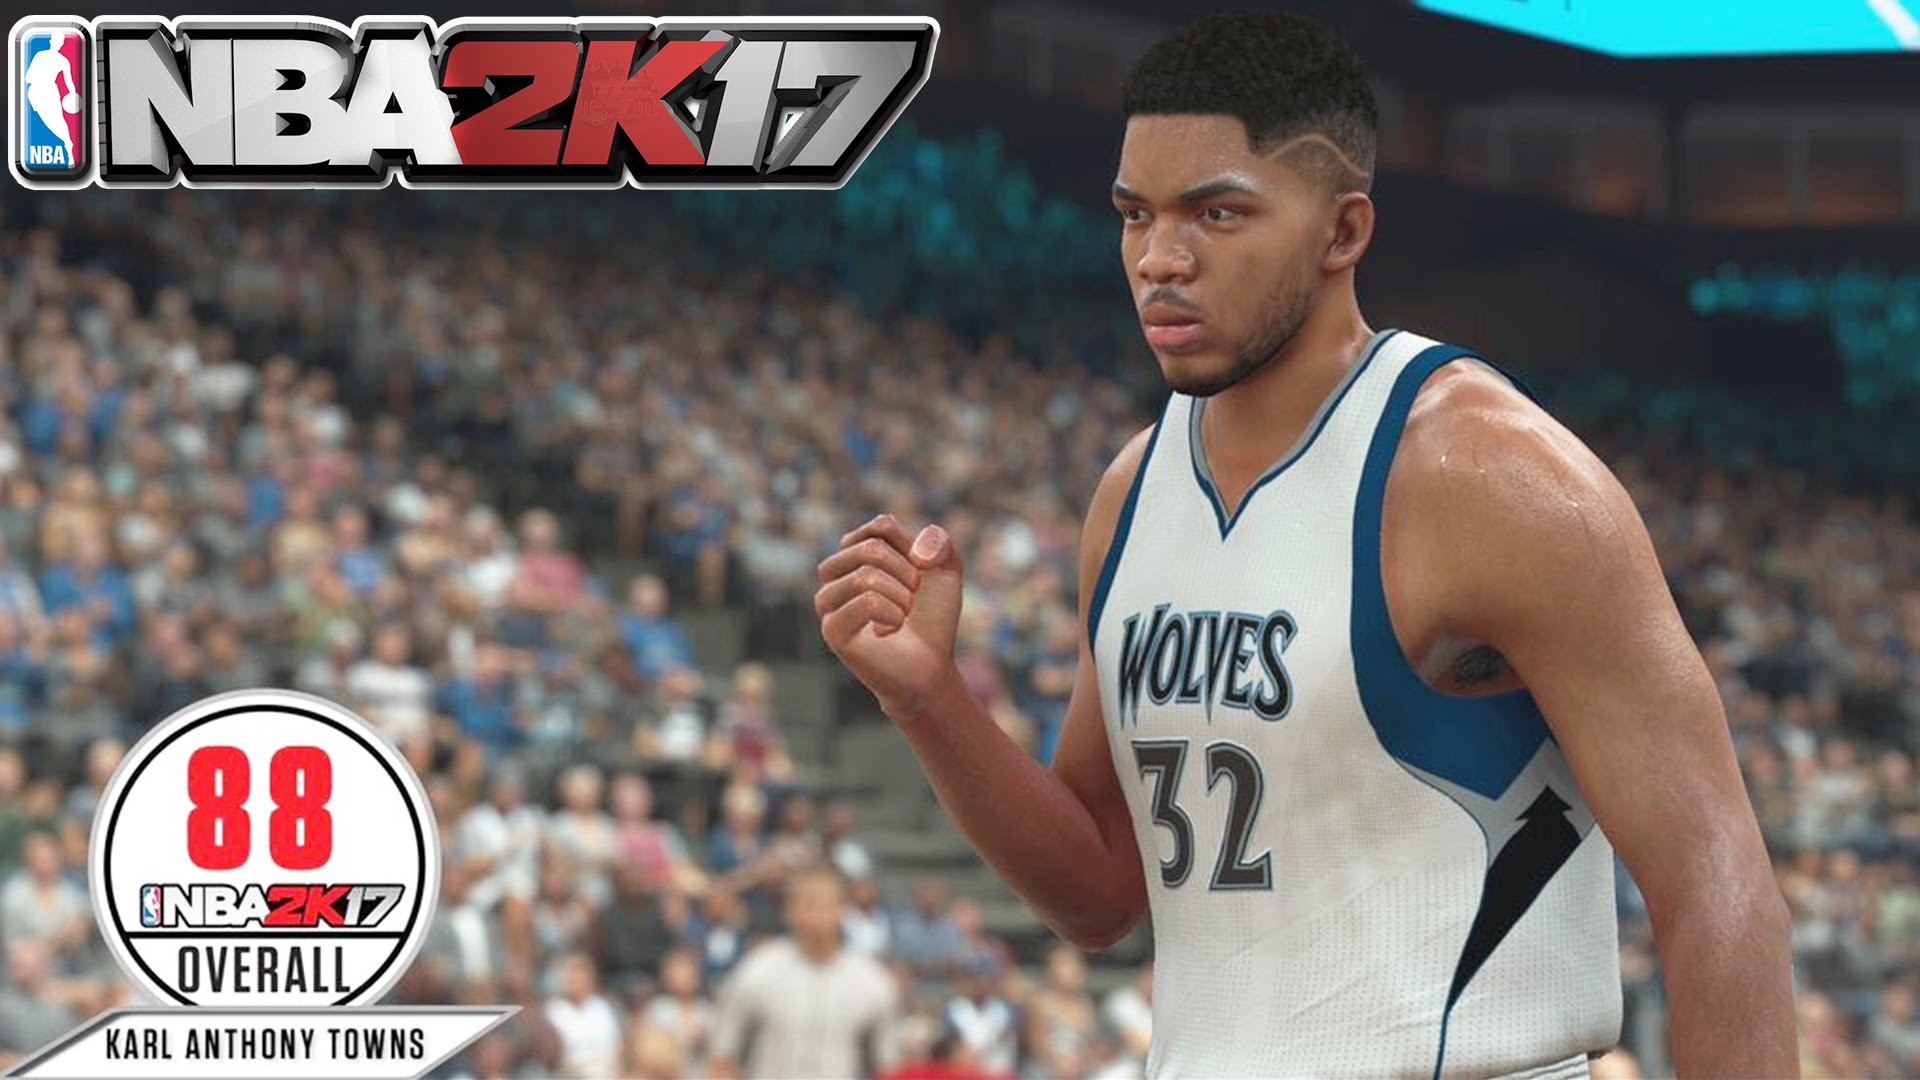 1920x1080 Karl Anthony Towns! Ben Simmons and More!